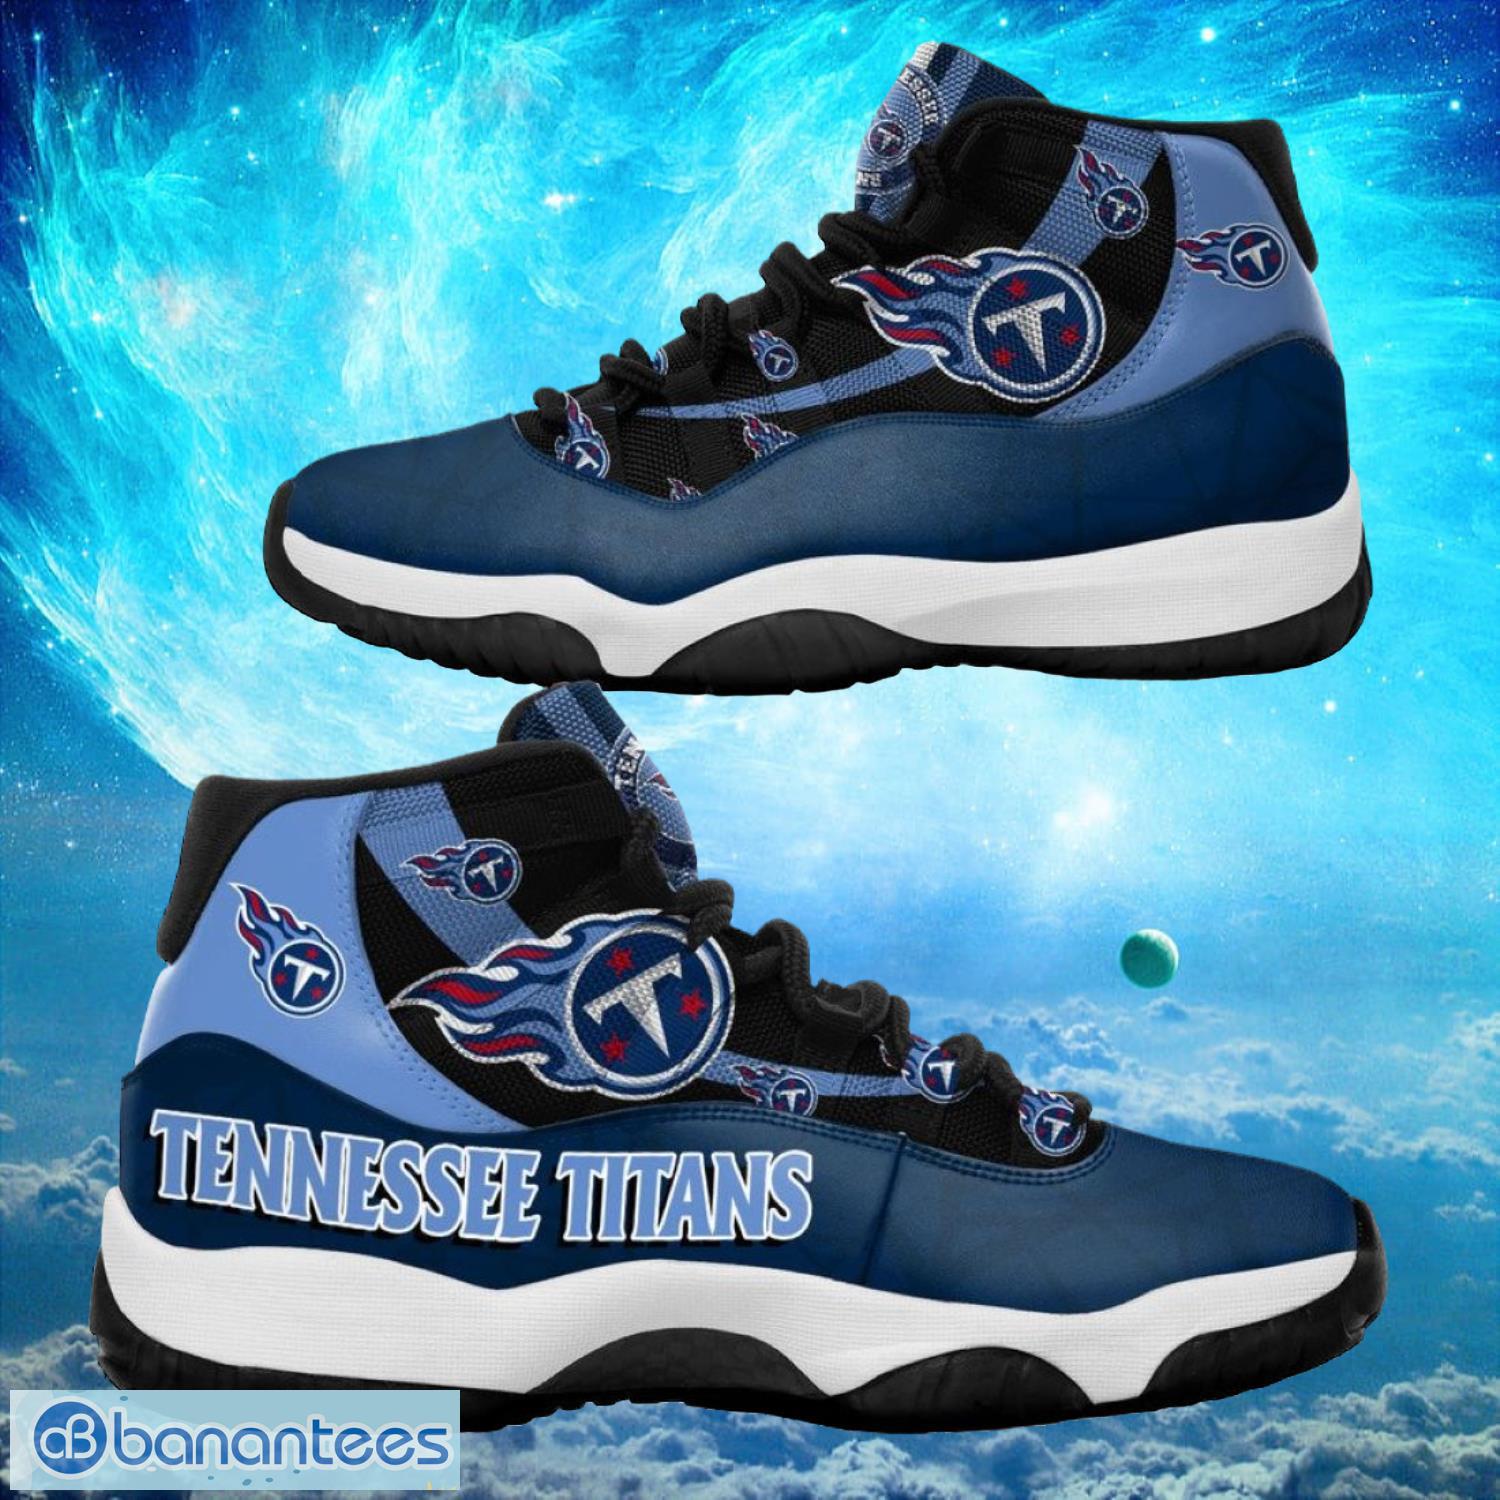 Tennessee Titans NFL Air Jordan 11 Sneakers Shoes Gift For Fans Product Photo 1